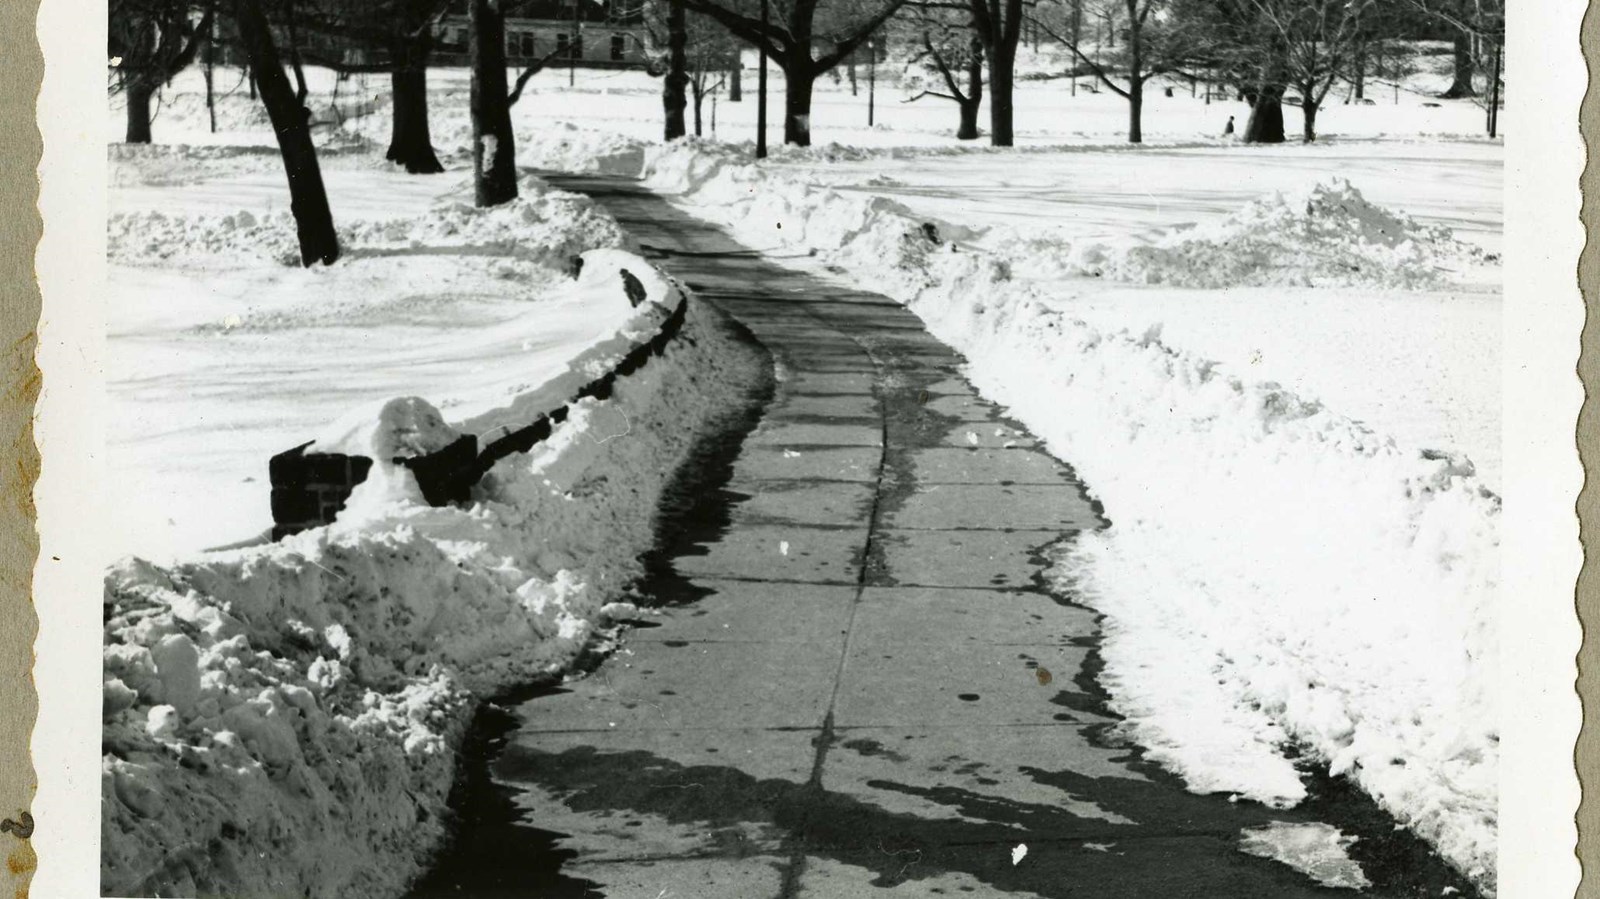 Black and white of curving paved path through park with snow on ground and trees spread out